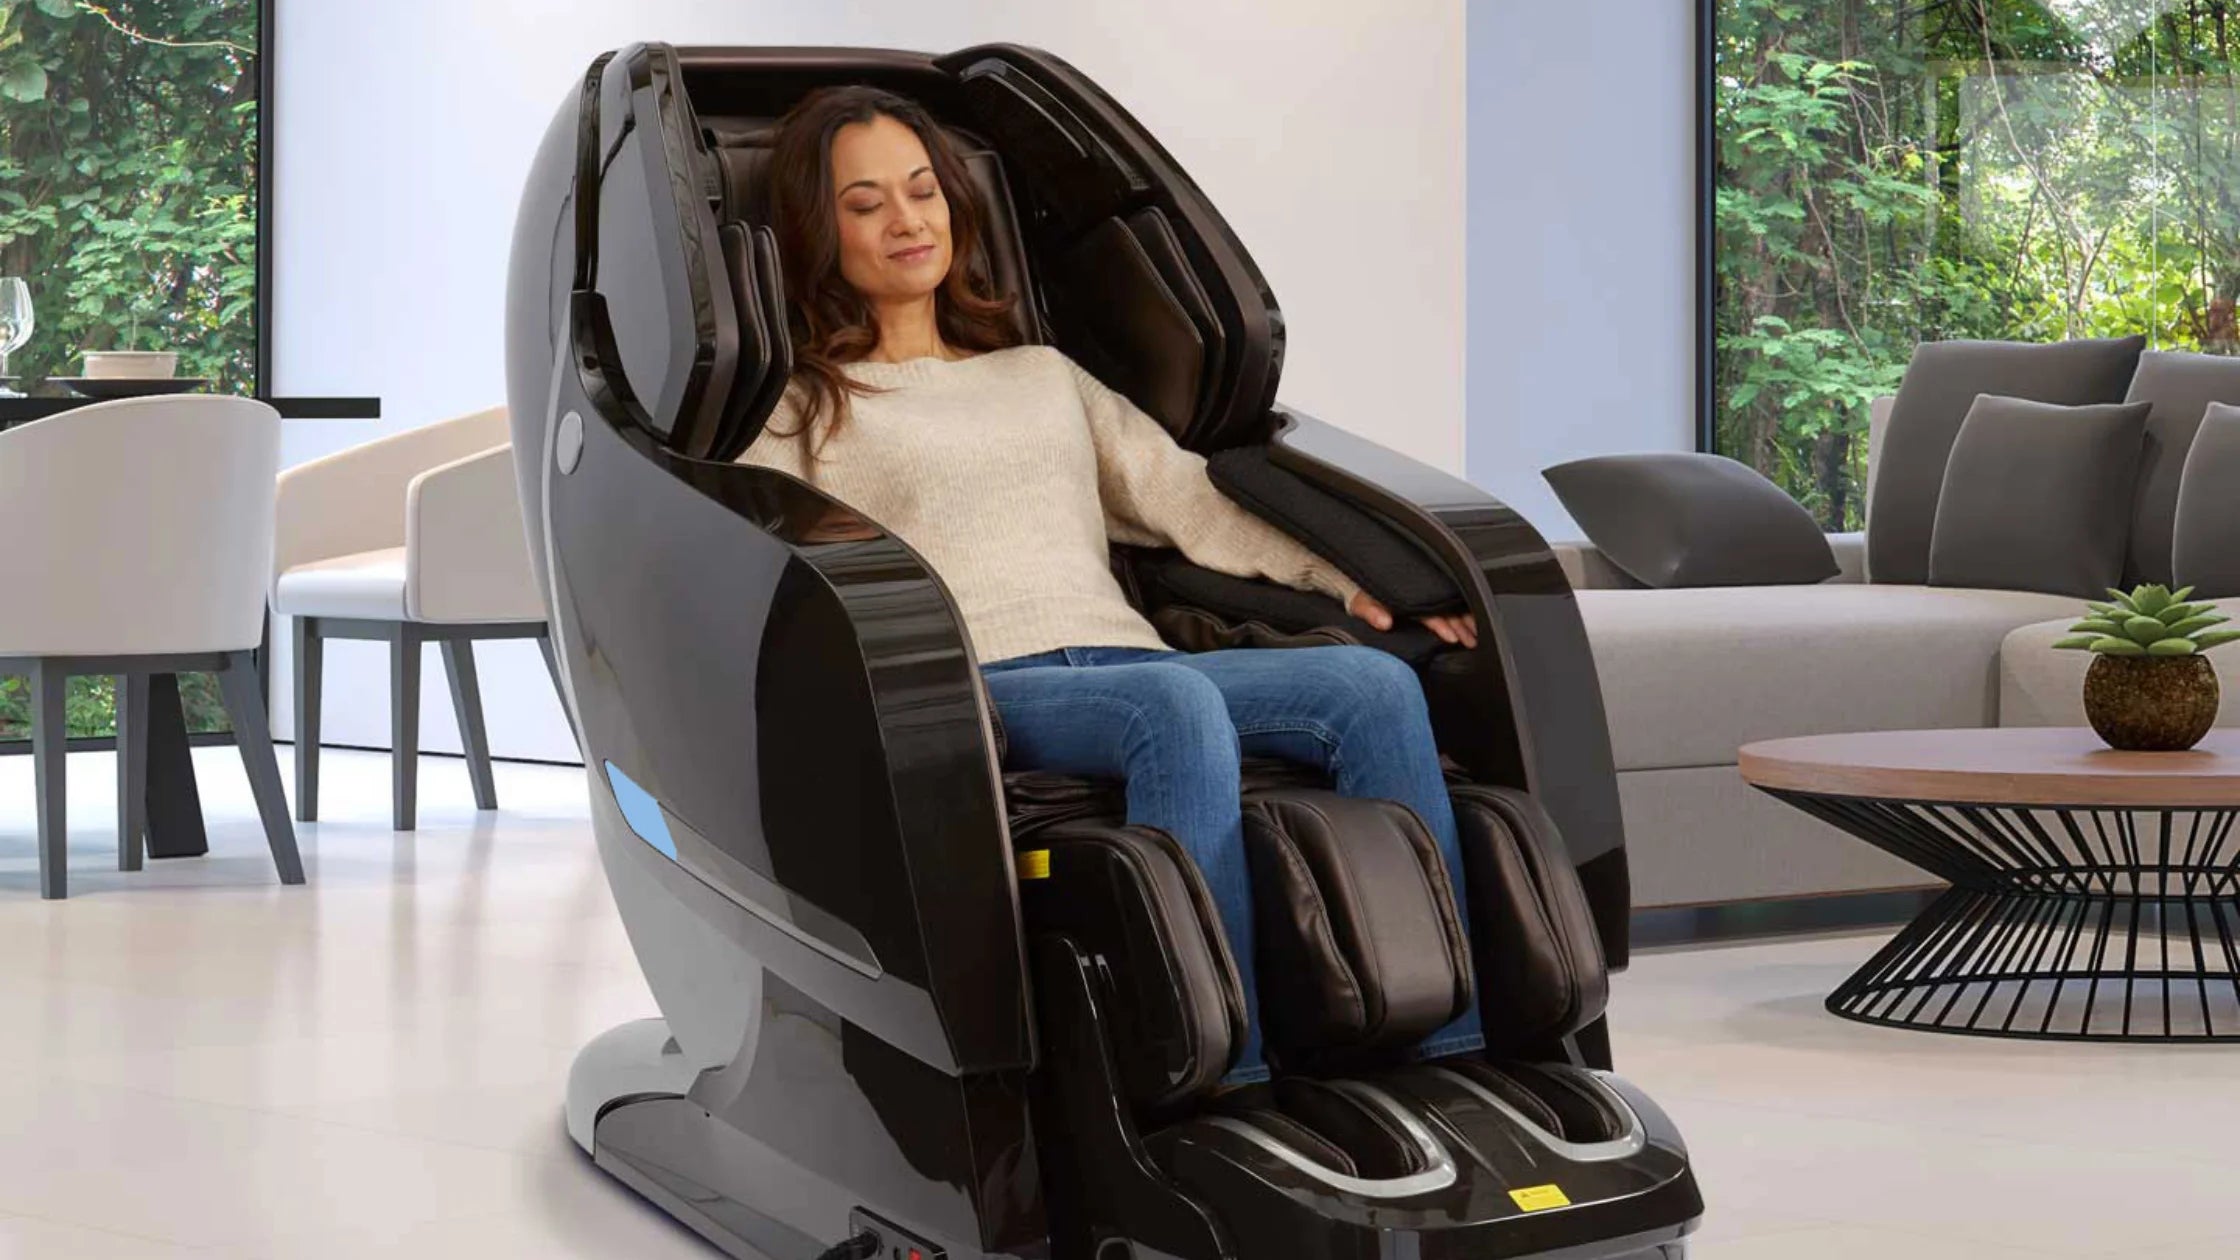 A woman sitting on a massage chair